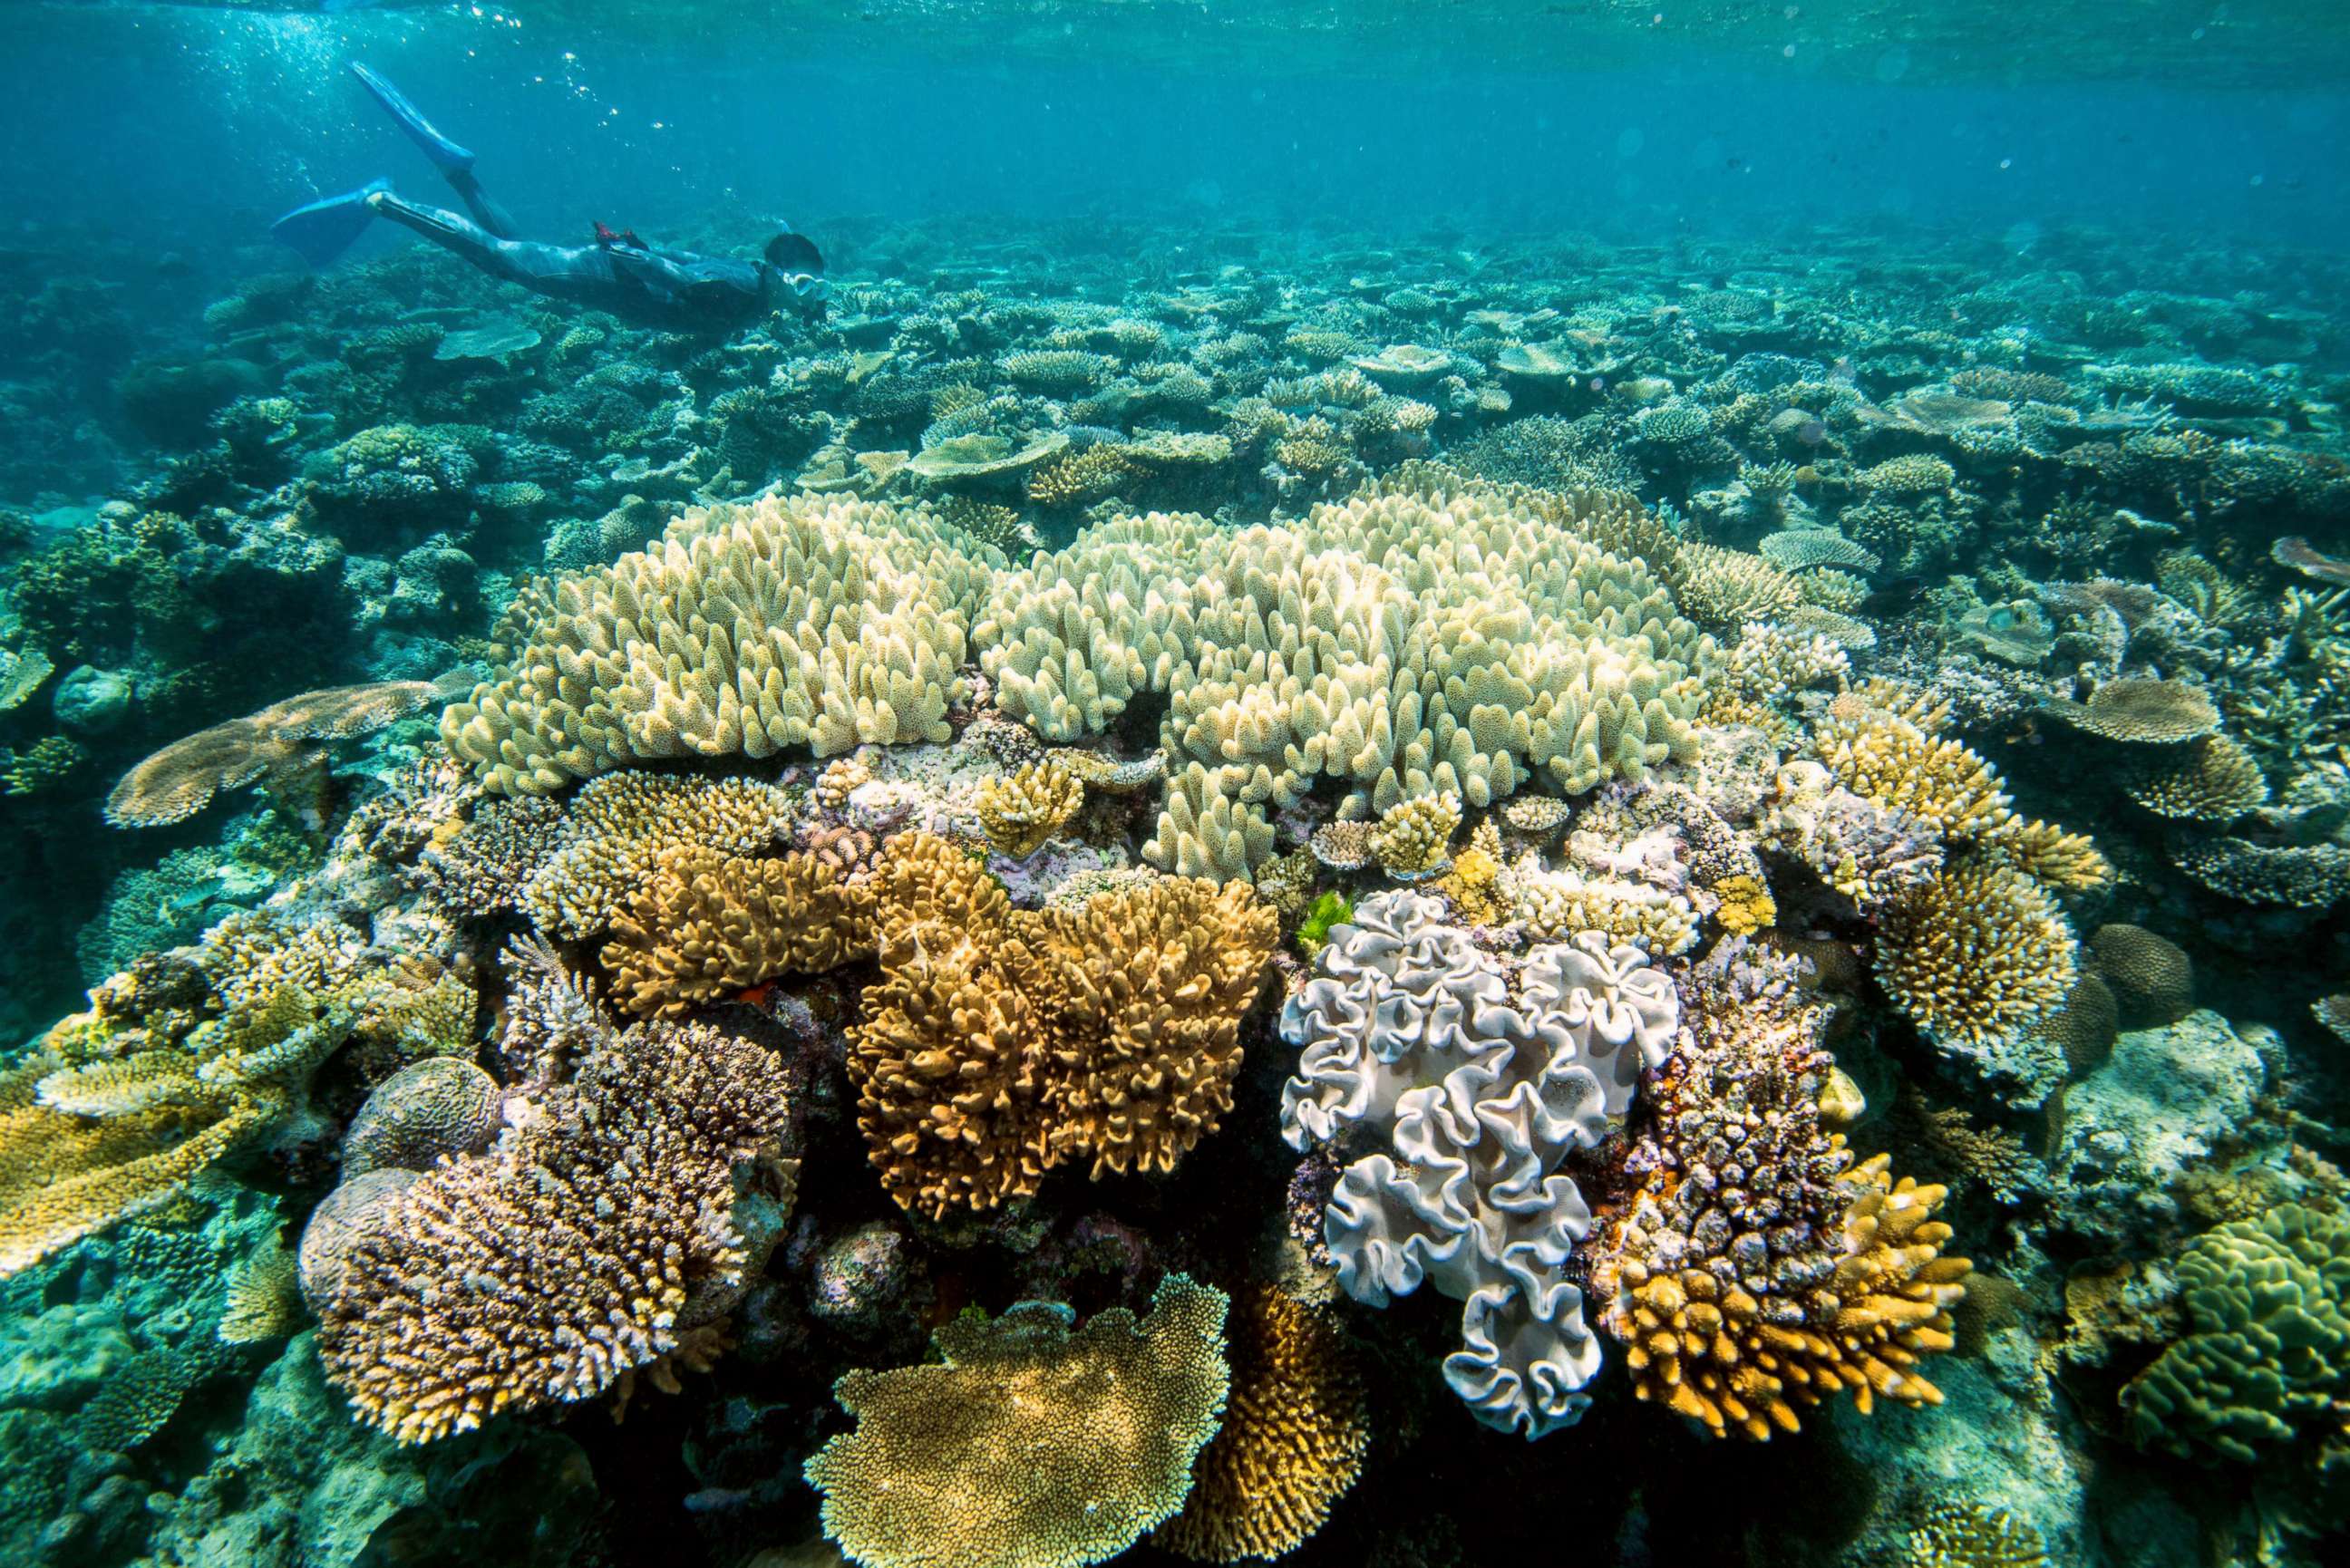 PHOTO: A swimmer snorkels through corals in the Great Barrier Reef off the northeastern coast of Australia.